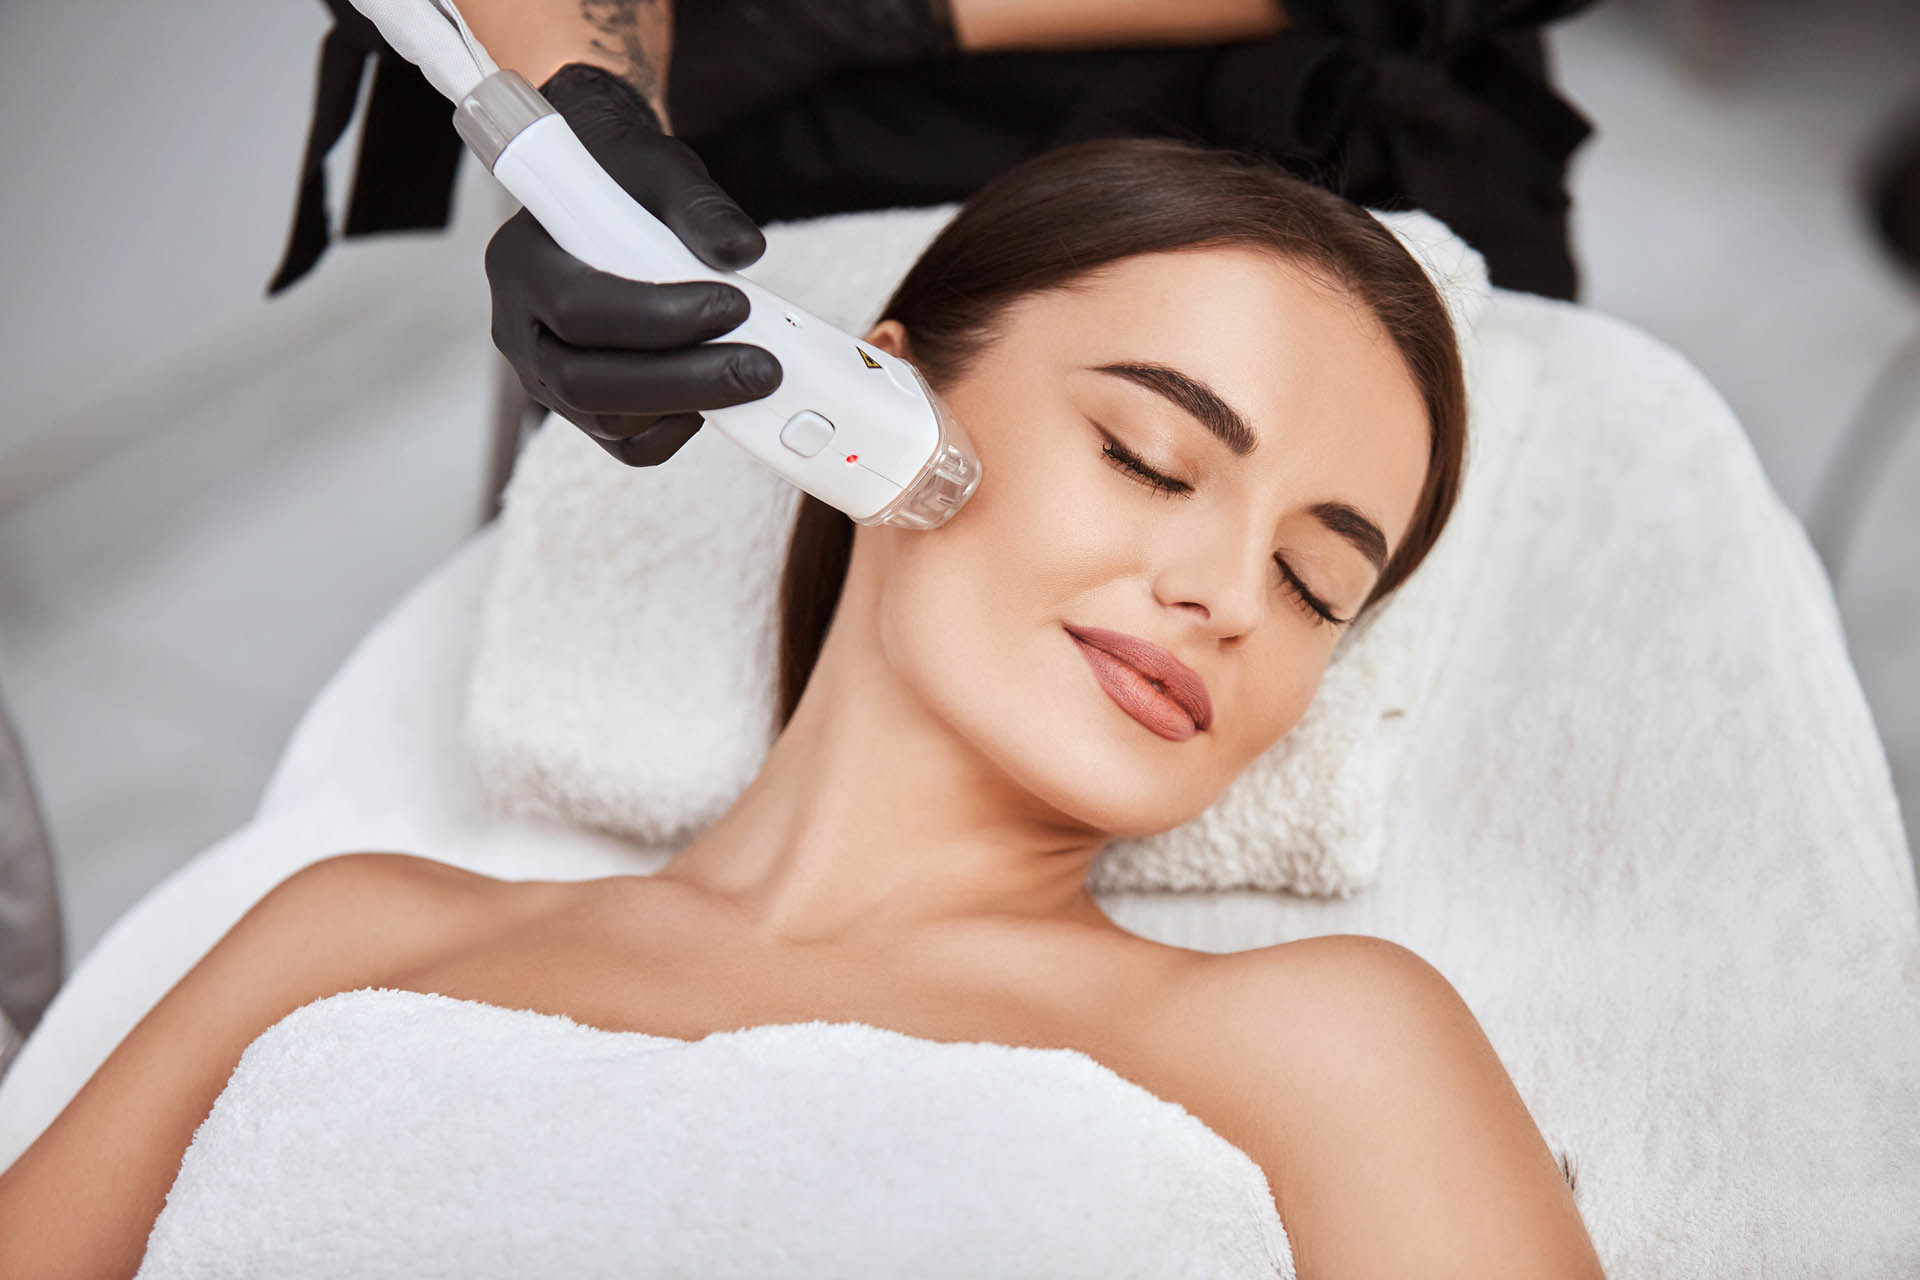 Laser hair removal Ealing - Laser Treatments - Silky Smooth